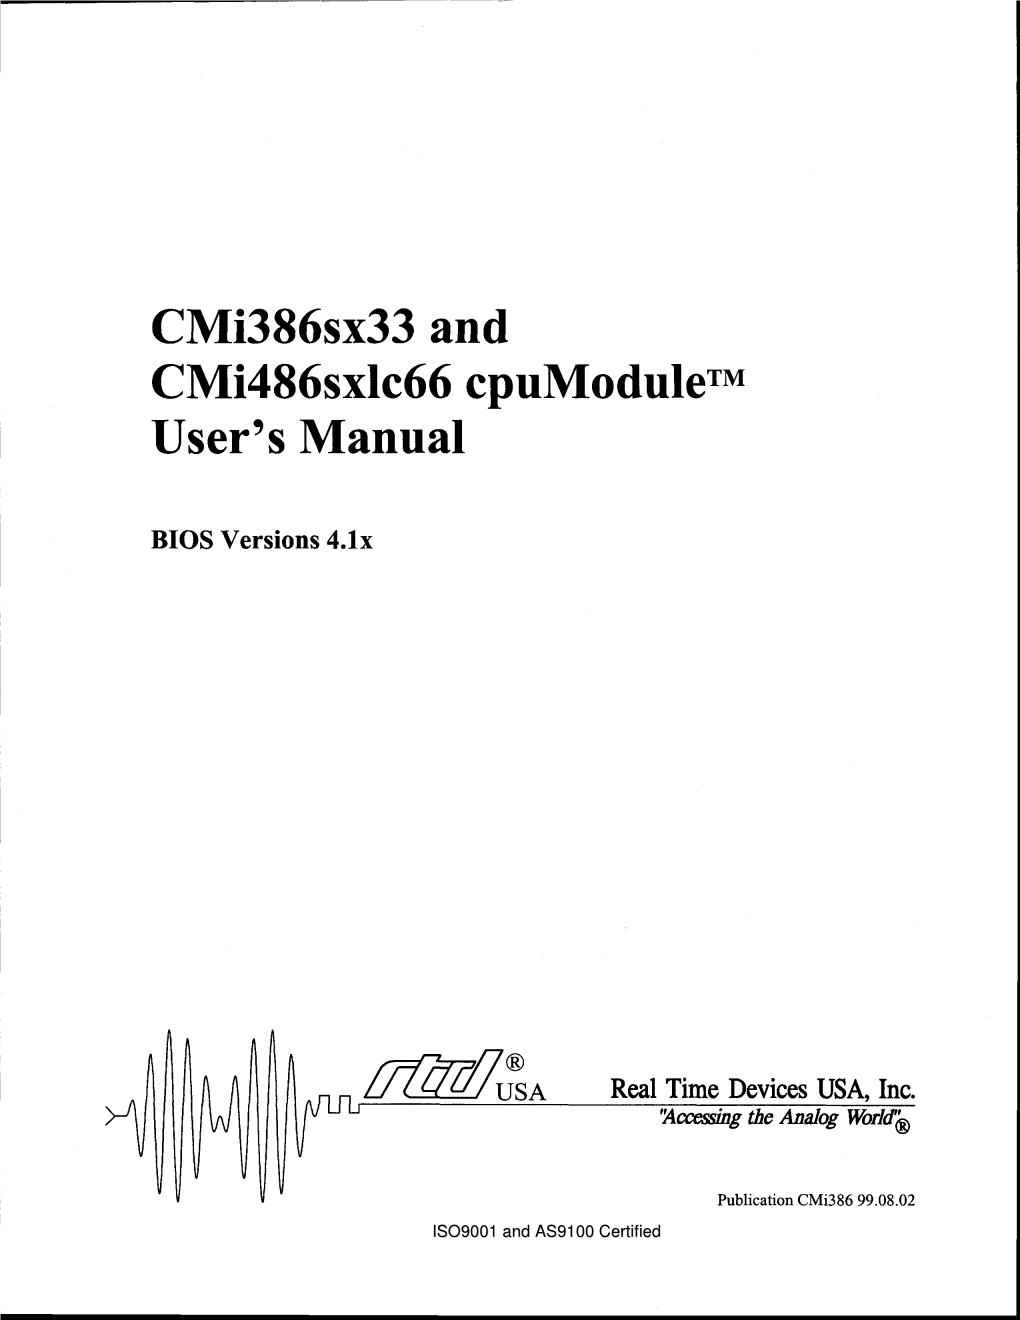 Cmi386sx33 and Cmi486sxlc66 Are Trademarksof Real Time Devices USA